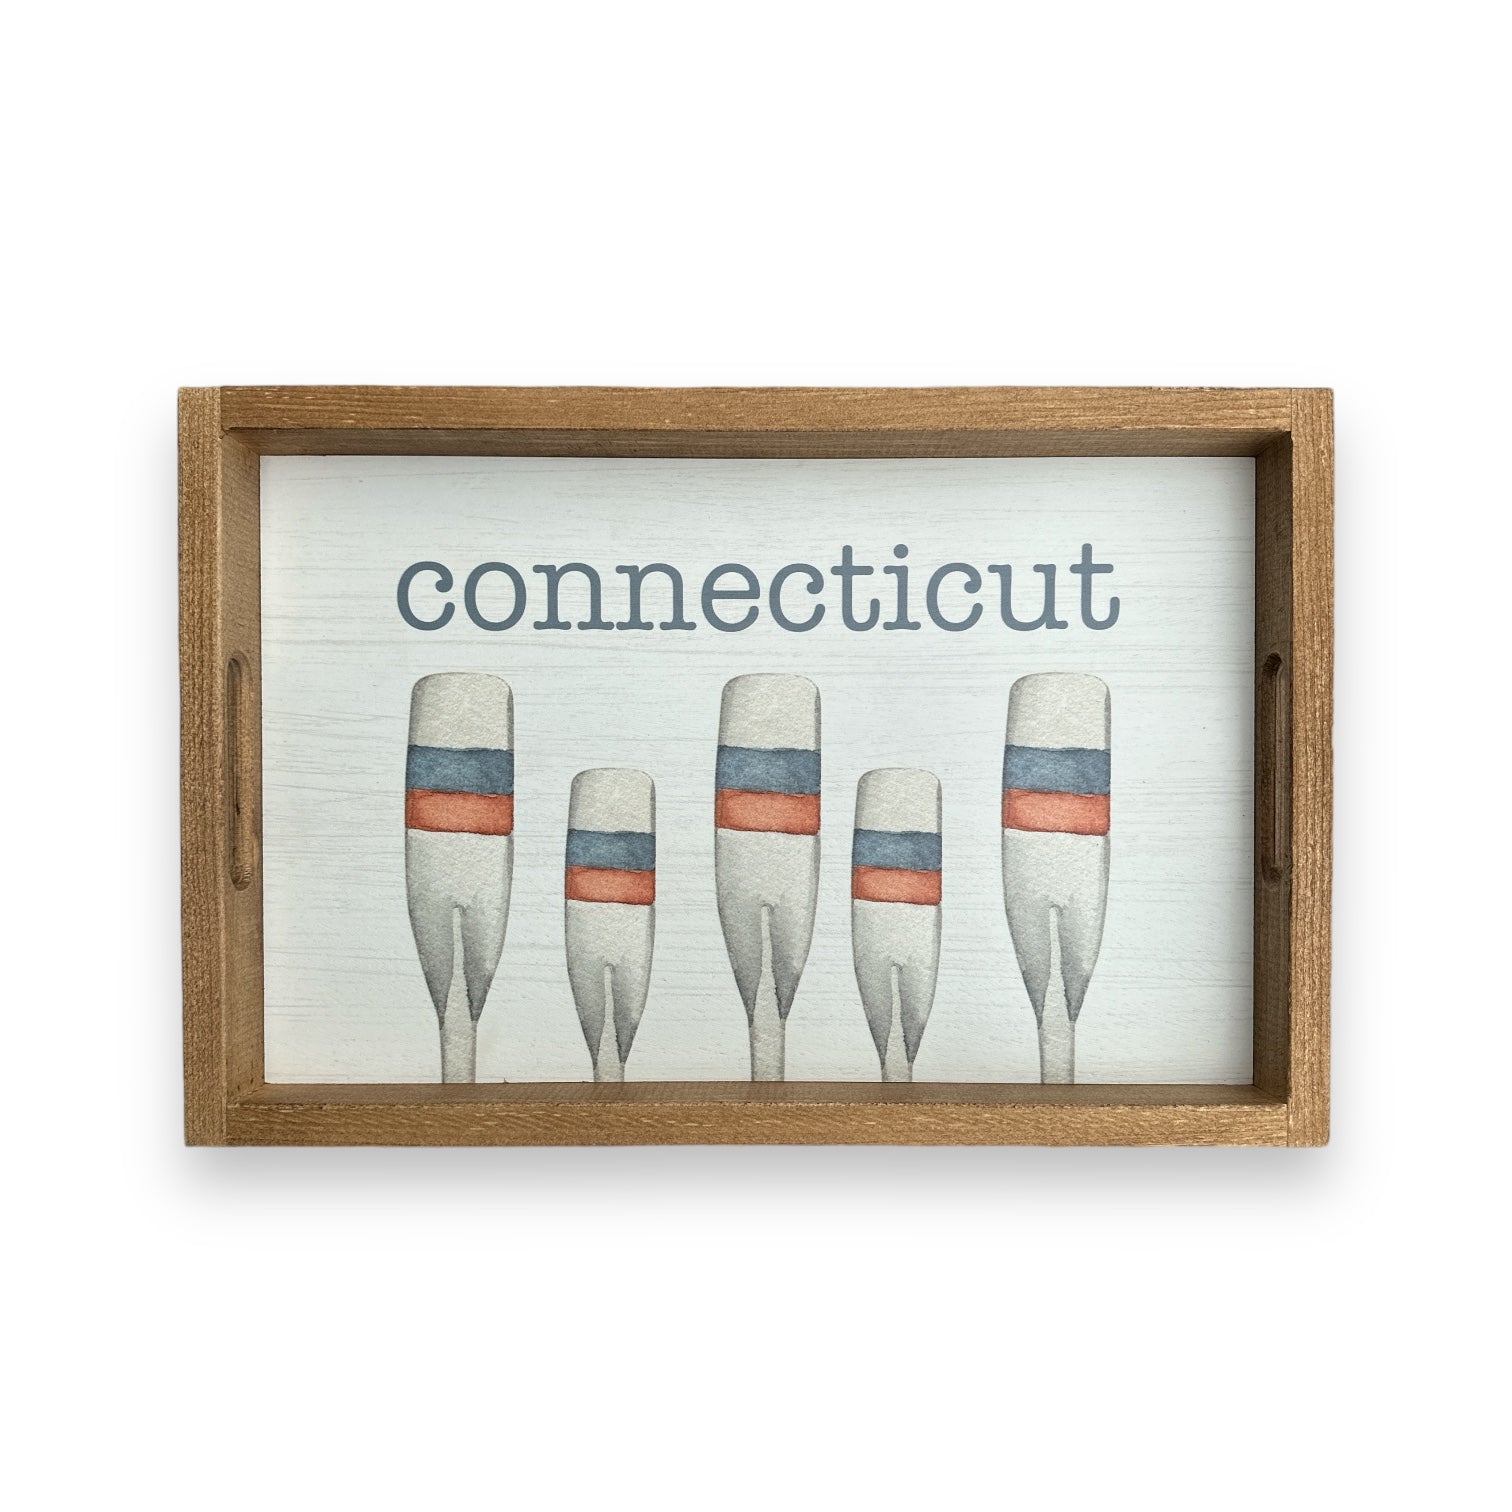 Connecticut Watercolor Oars Handcrafted Wood Serving Tray - 19-1/2-in - Mellow Monkey